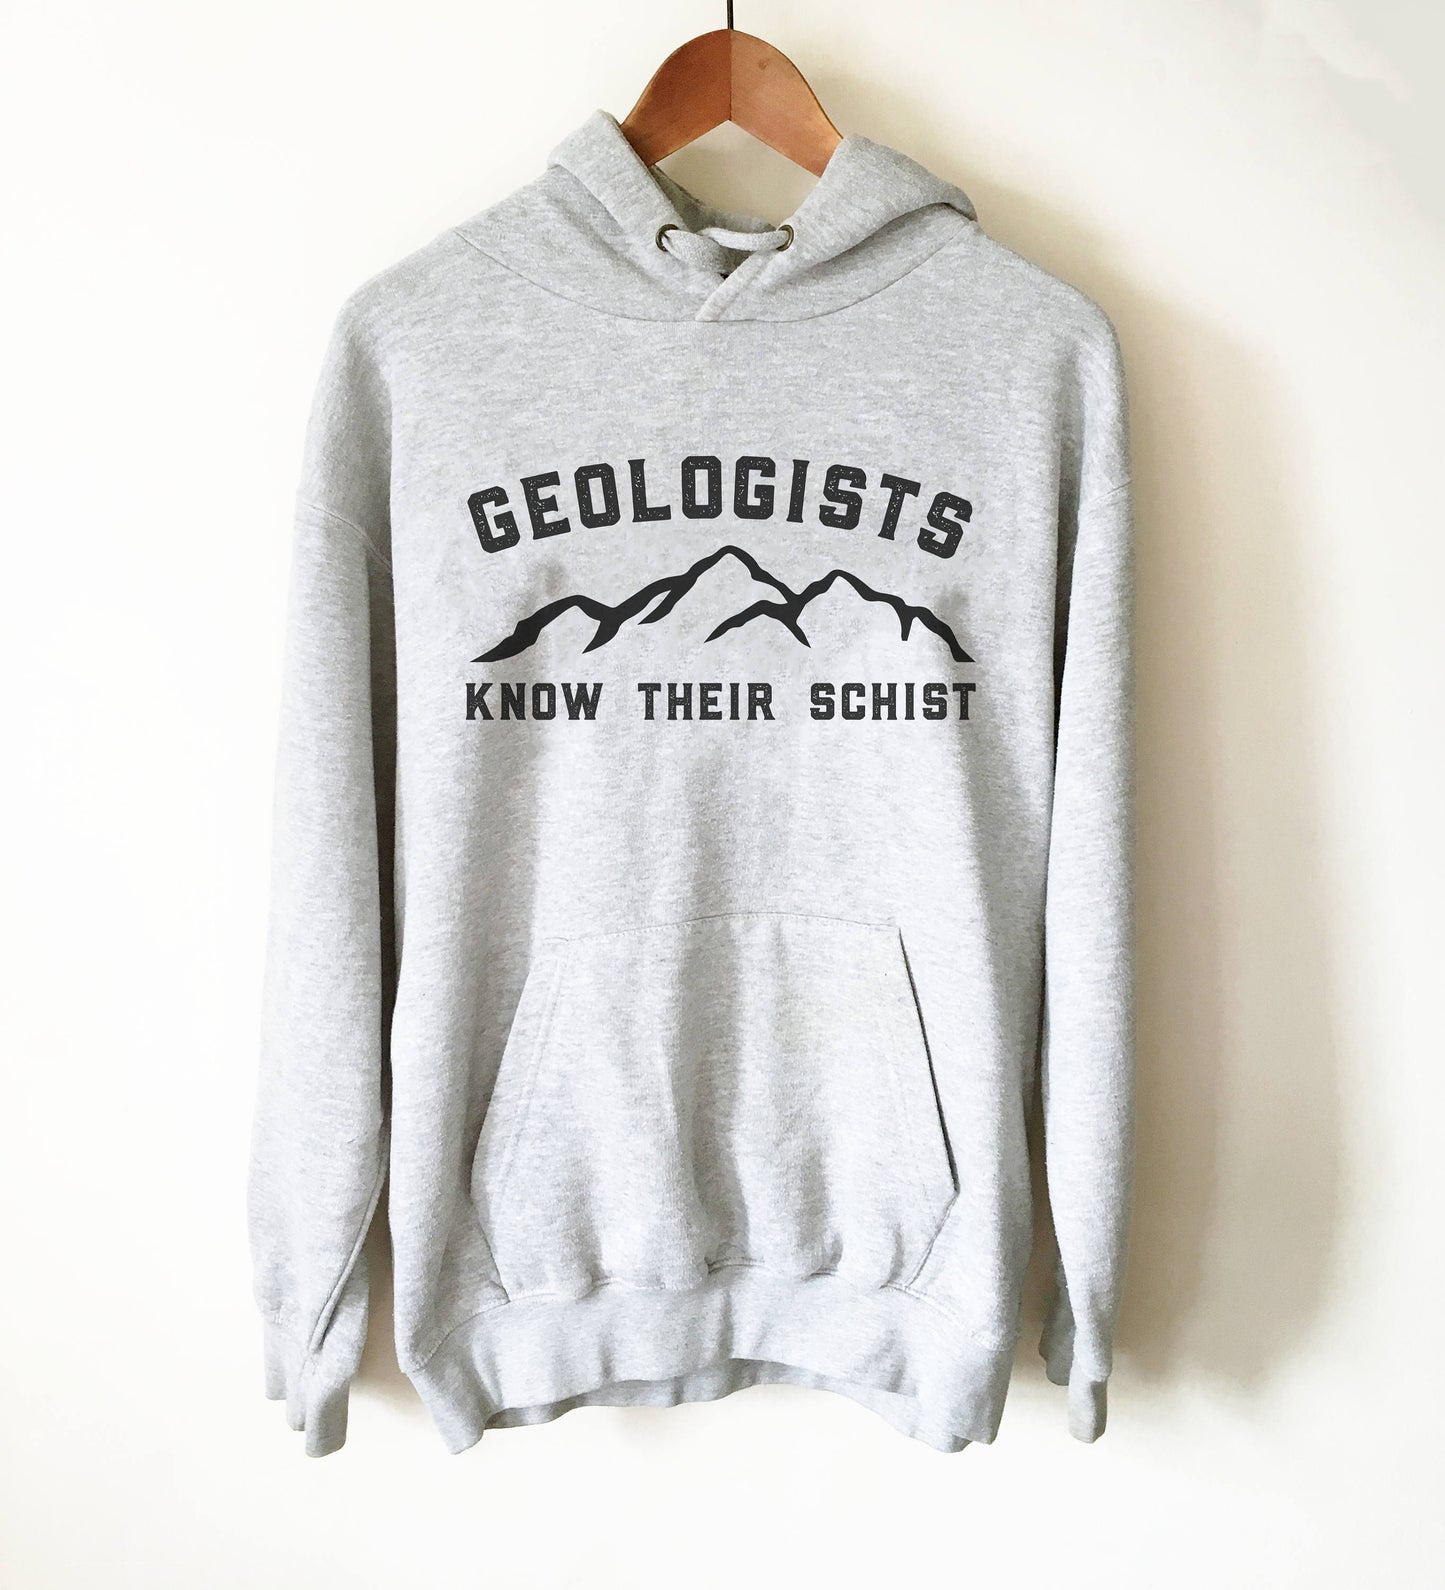 Geologists Know Their Schist Hoodie - Geology shirt, Geologist, Geologist gift, Geology professor, Geology student, Geology puns